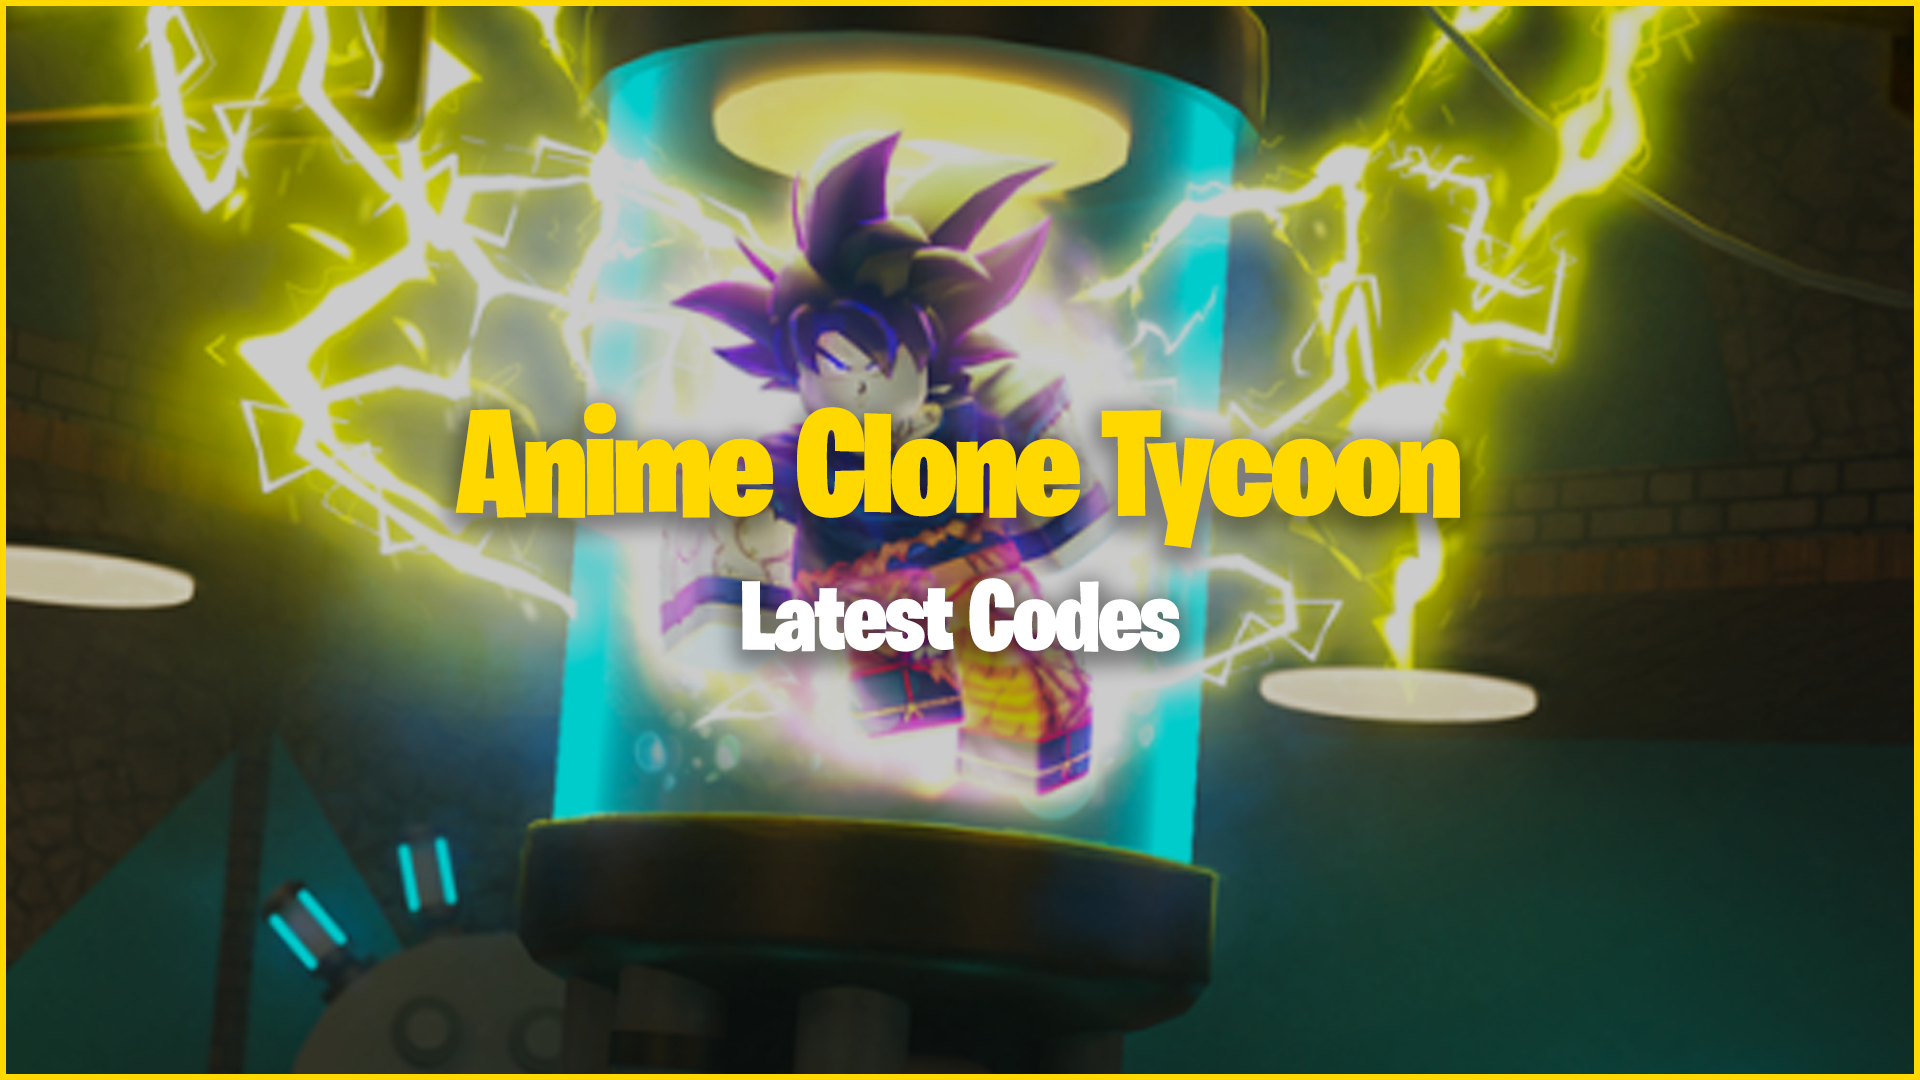 Anime Clone Tycoon Codes on